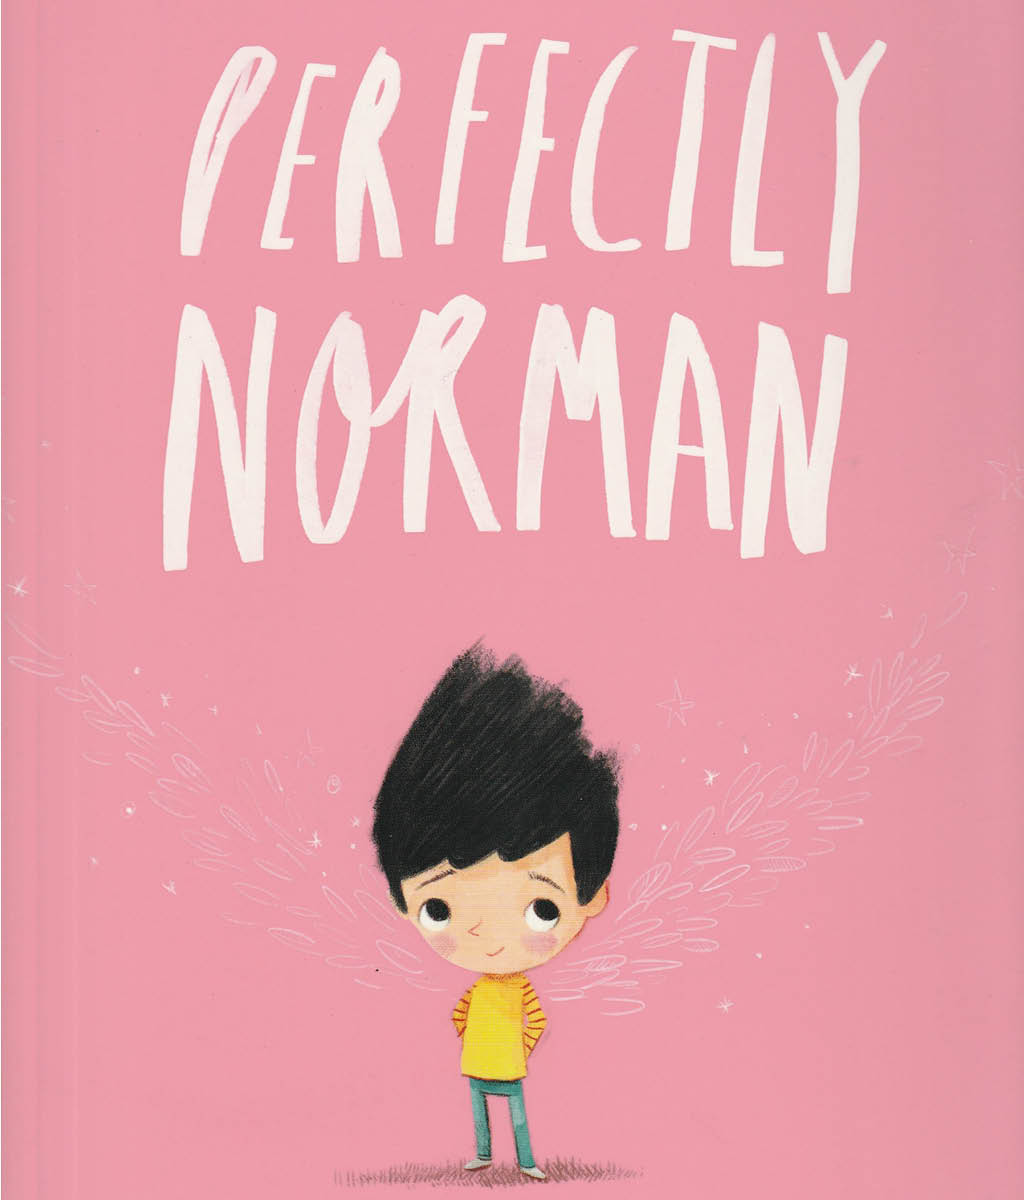 Perfectly Norman: A Big Bright Feelings Book by Tom Percival